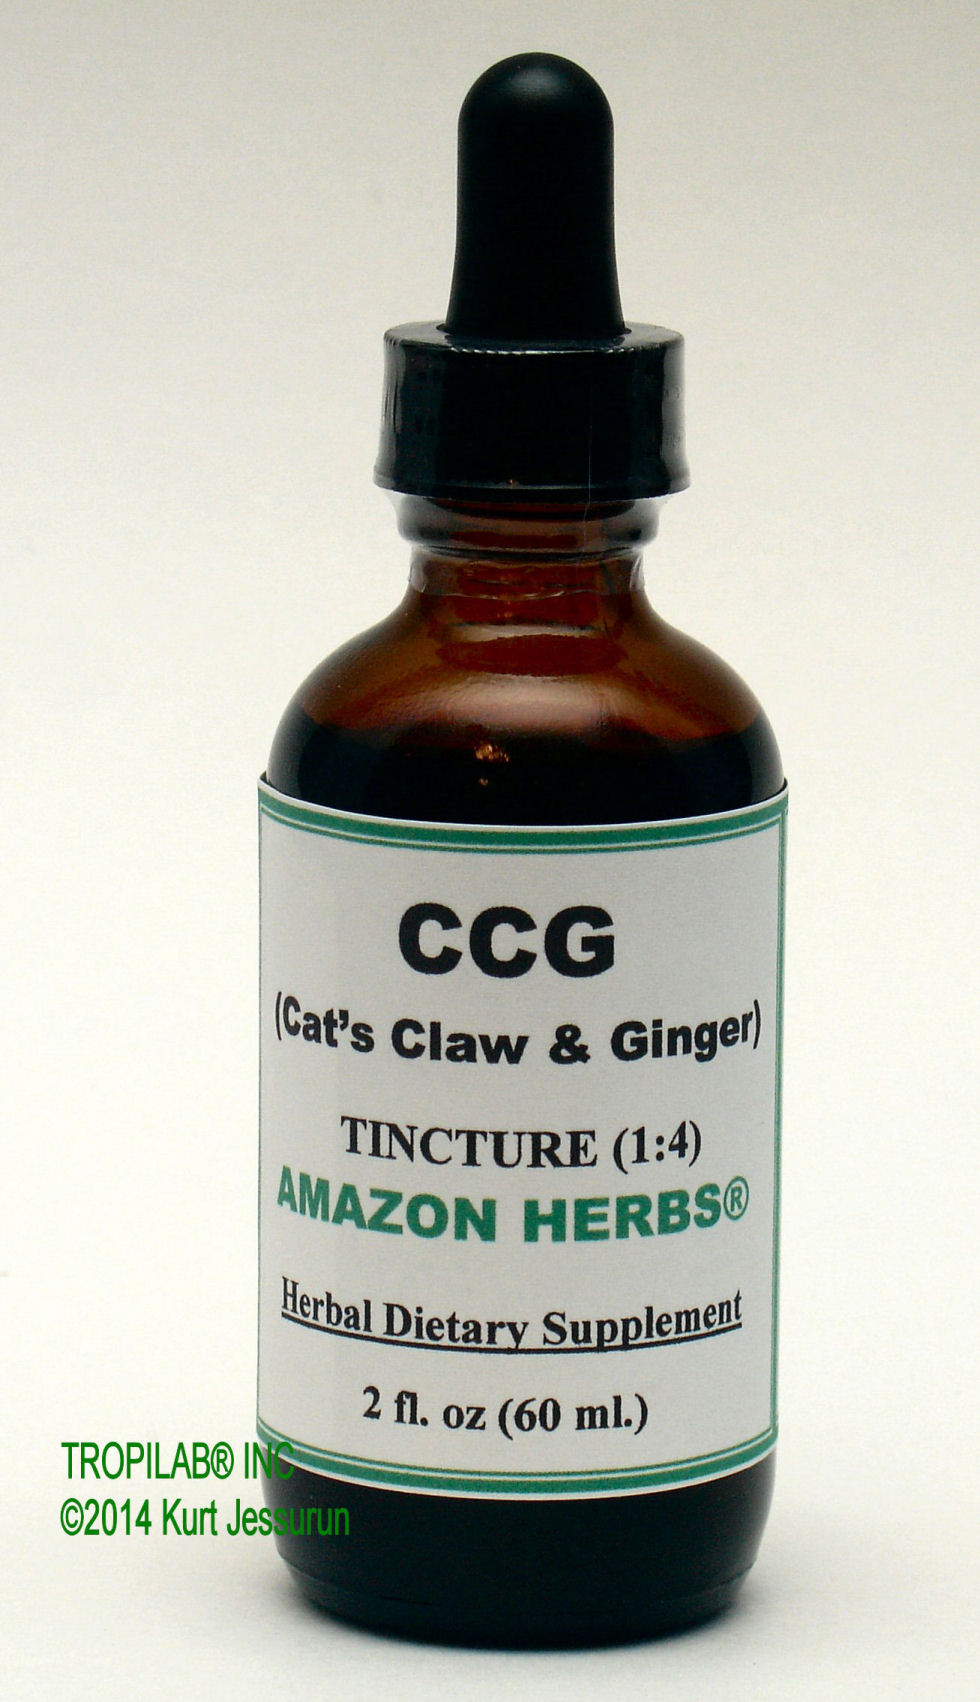 Cat's claw and Ginger - CCG tincture, only for US$24.00 per 2 fl oz. Very effective against inflammation of the upper respiratory
 tract. Cat's claw fights virus infections of the upper respiratory tract and is a strong immune system booster. Ginger stimulates
 circulation, fights viruses and helps clear the sinuses and lungs of mucus.